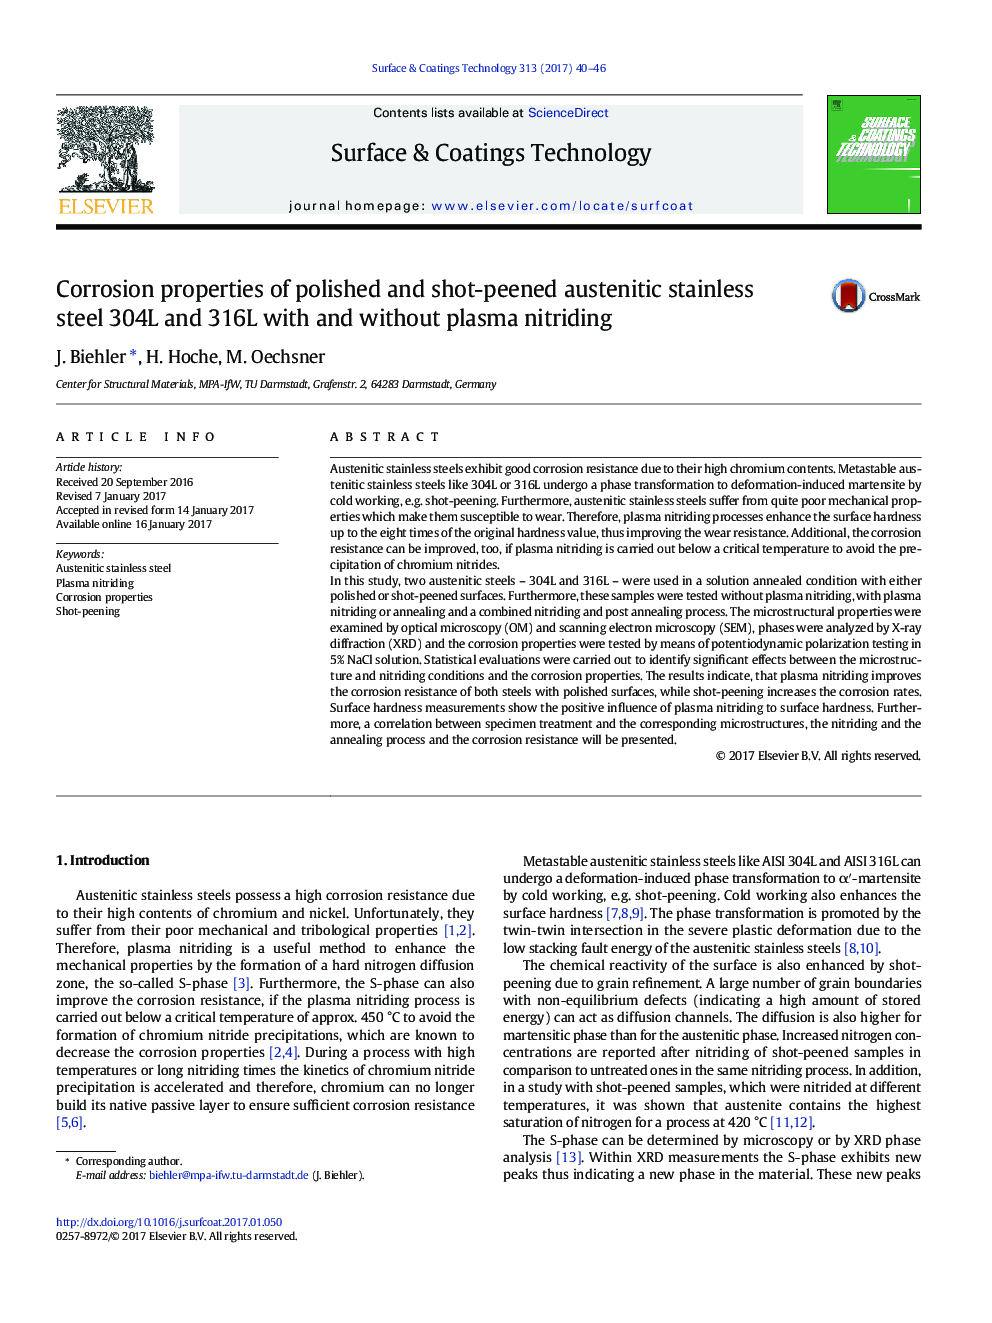 Corrosion properties of polished and shot-peened austenitic stainless steel 304L and 316L with and without plasma nitriding